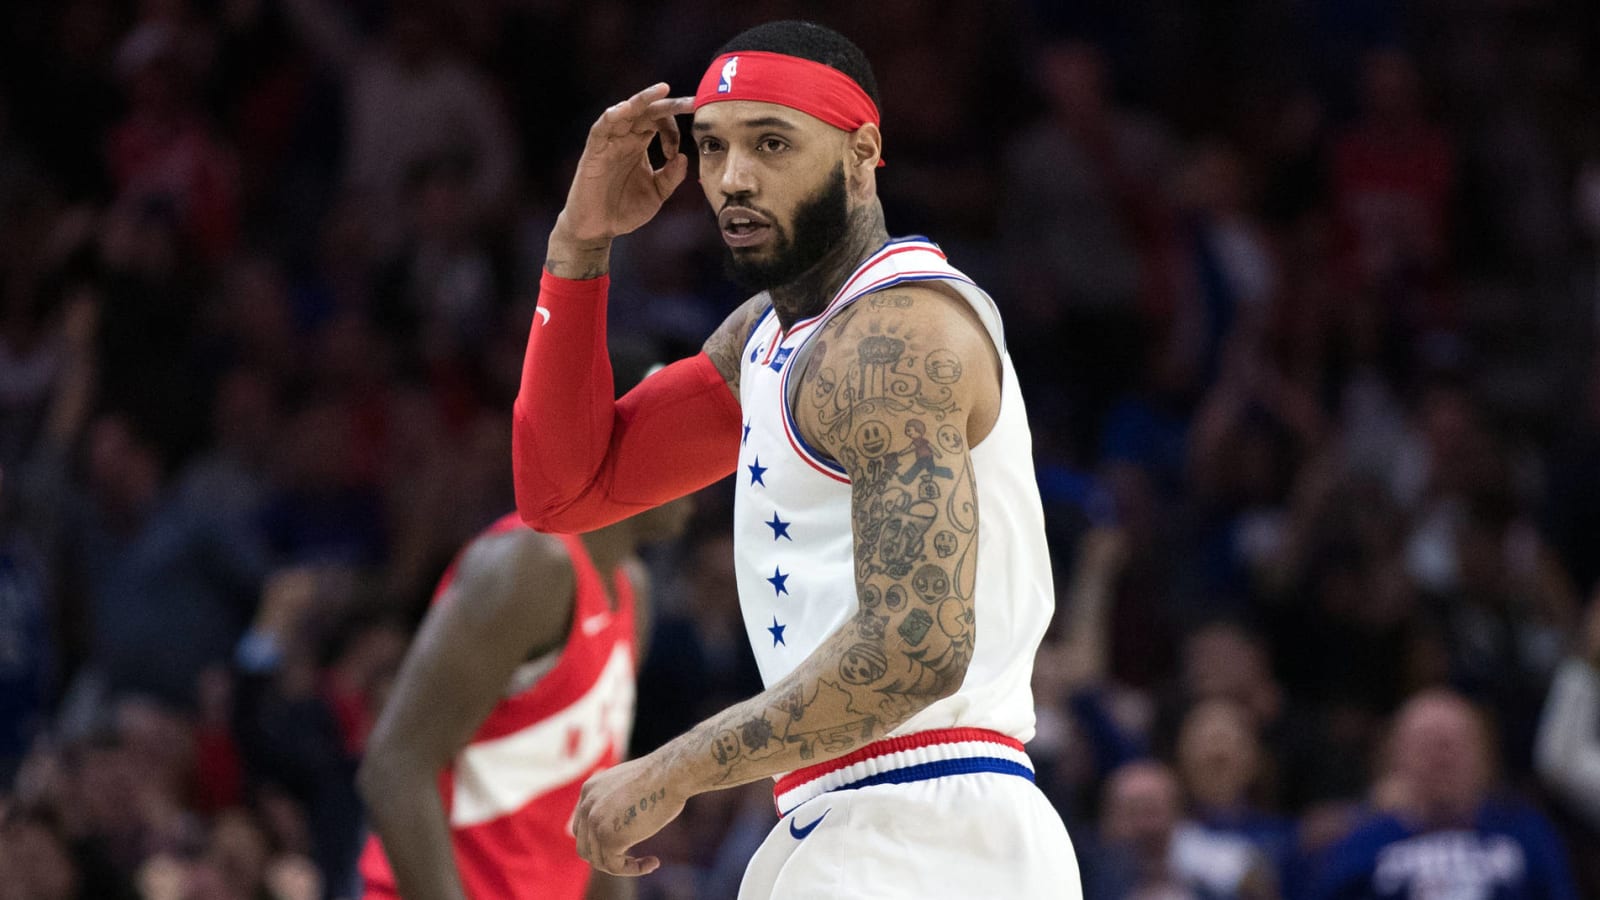 Mike Scott suggests Nike will not allow players to wear ninja-style headbands